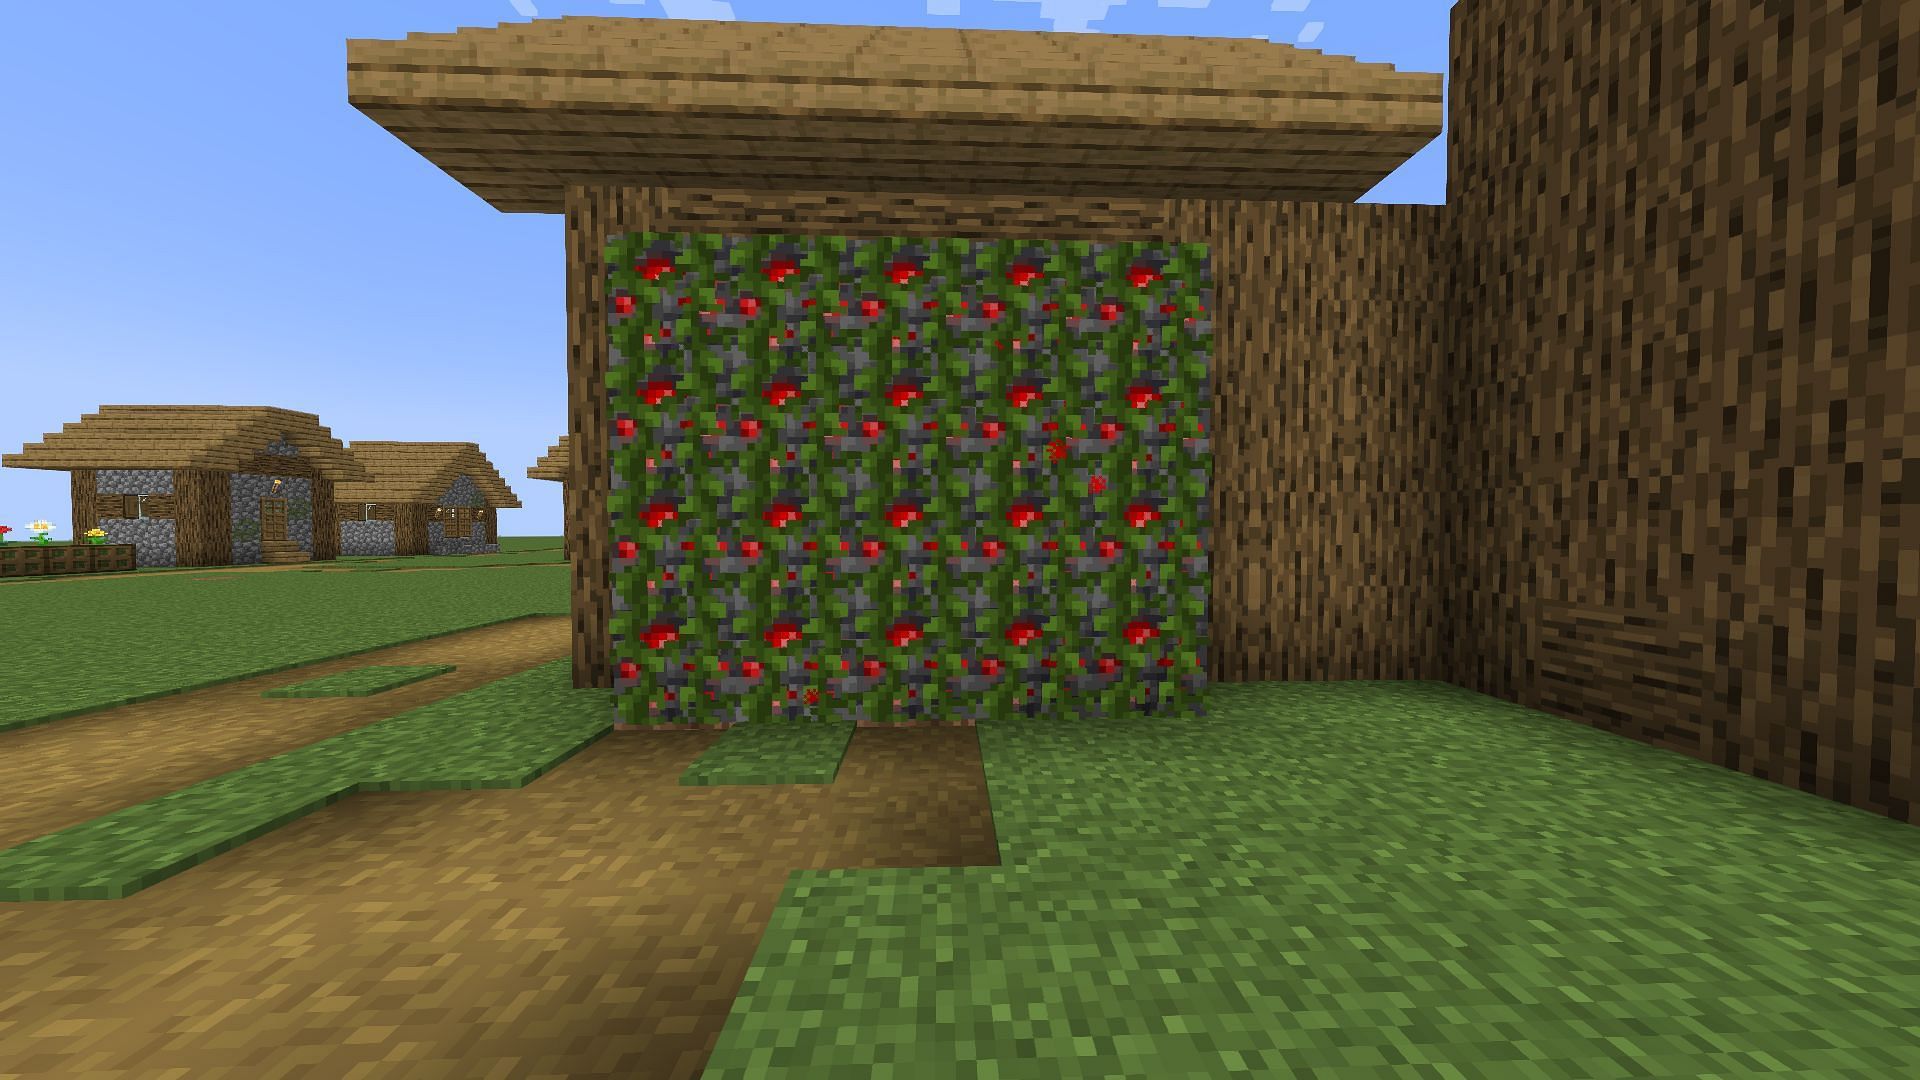 The redstone sweet berry design in Minecraft (Image via Mojang)